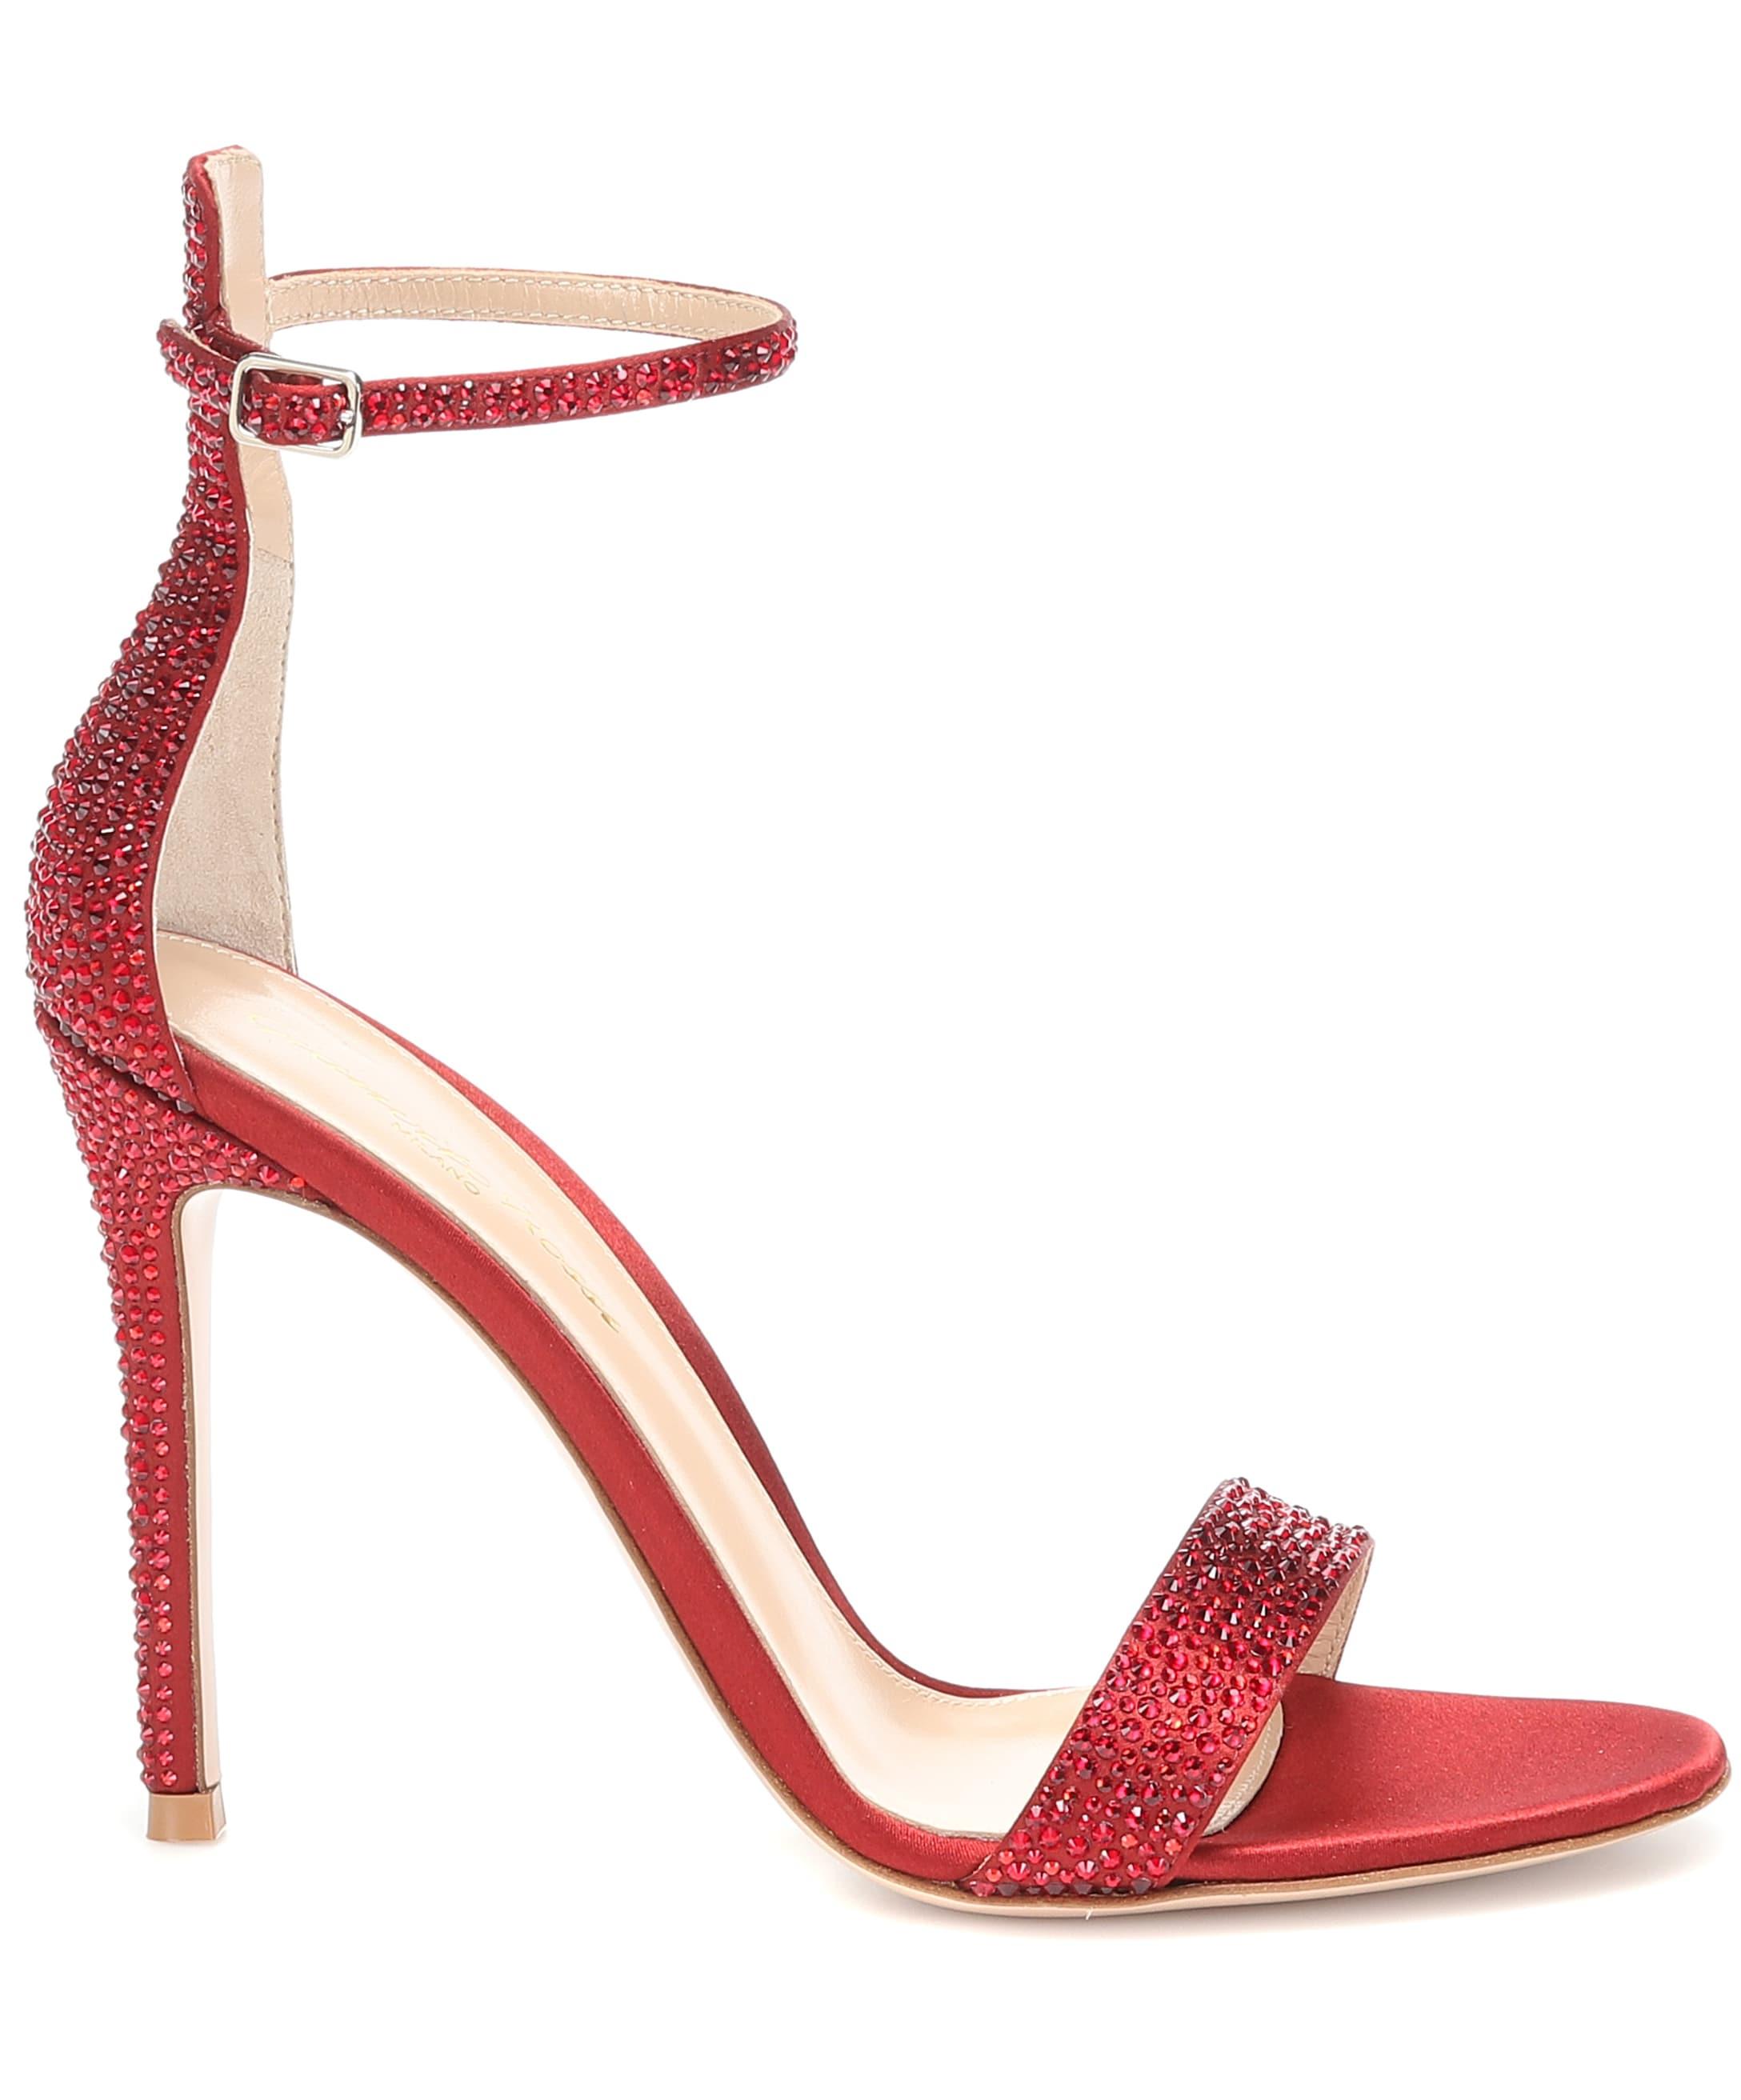 Gianvito Rossi Glam Embellished Satin Sandals in Red - Lyst